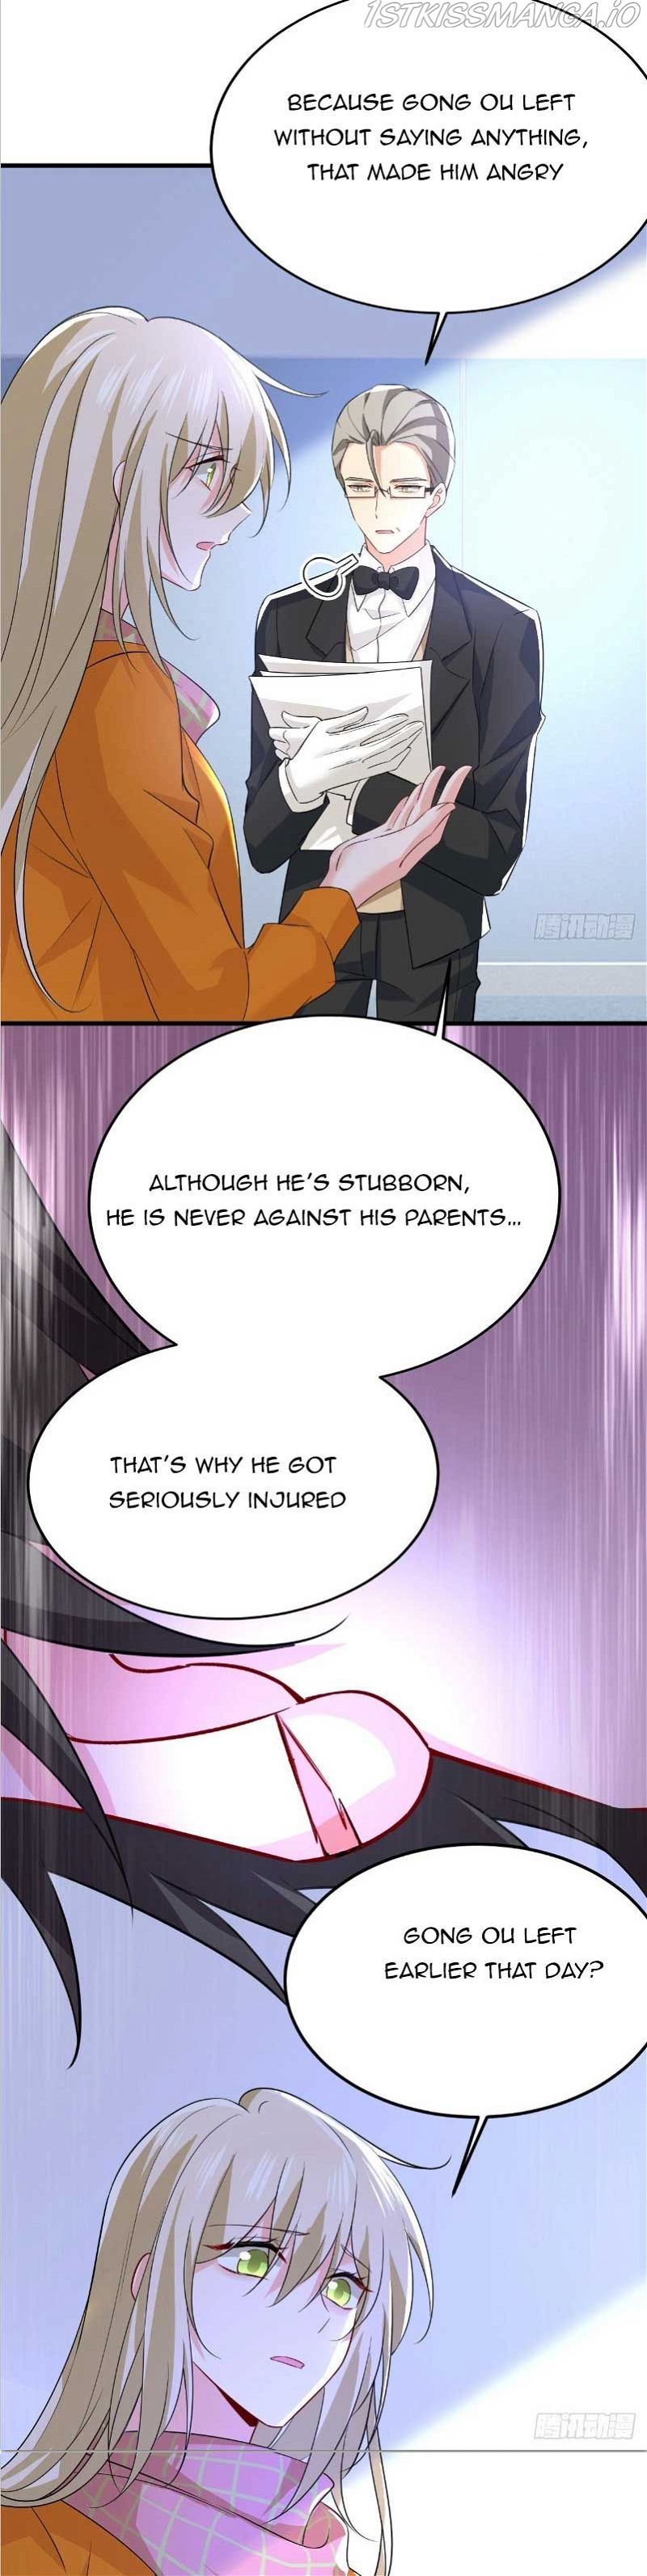 CEO Above, Me Below Chapter 561 page 2